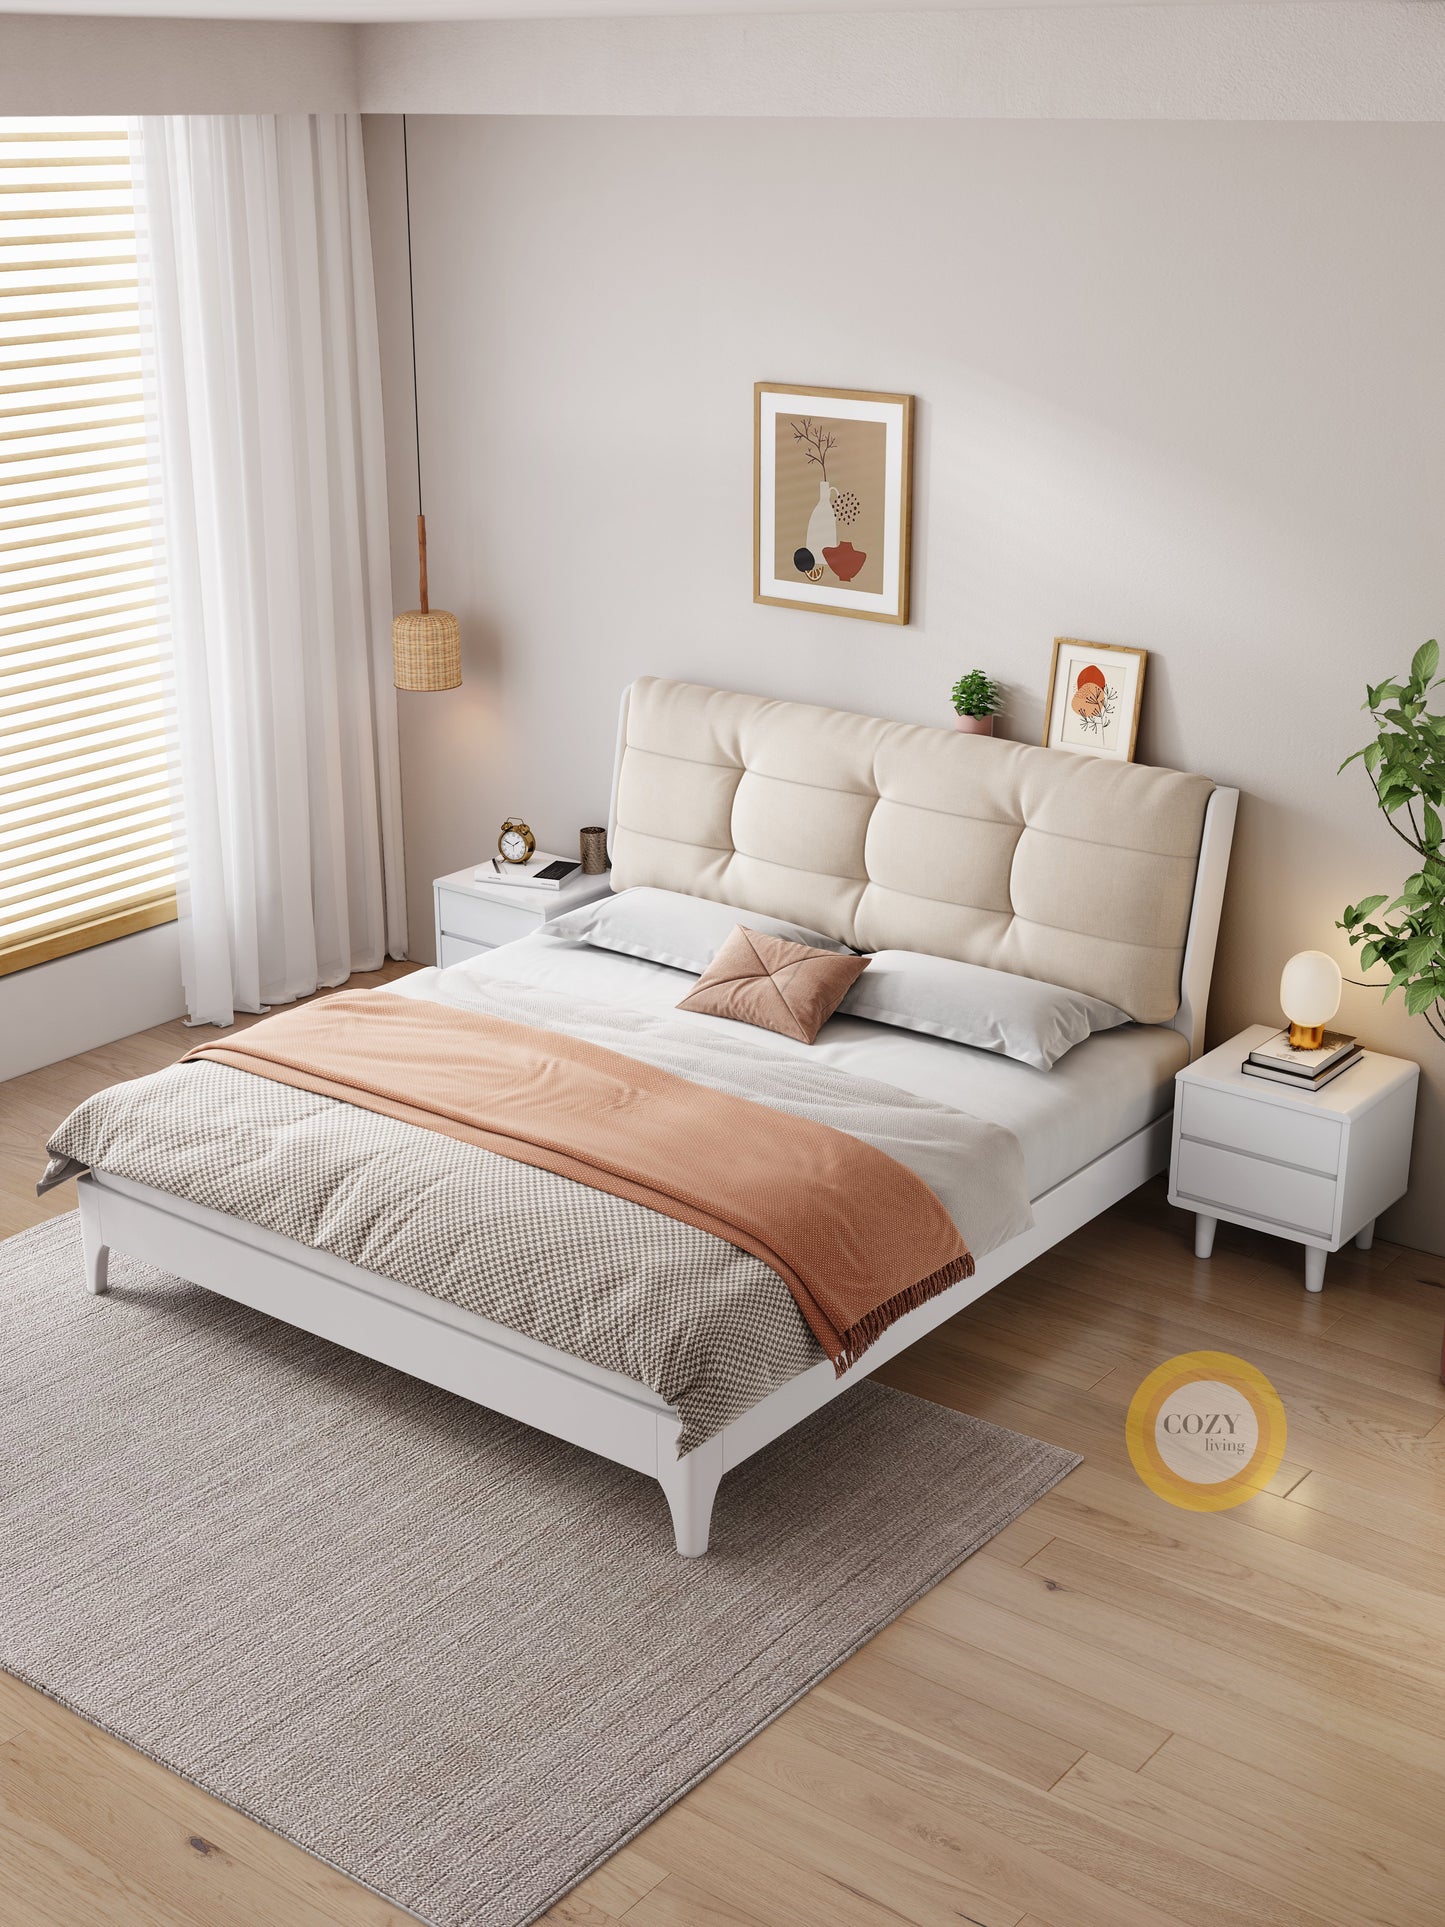 YF-106 Cloud cream style solid wood bed 